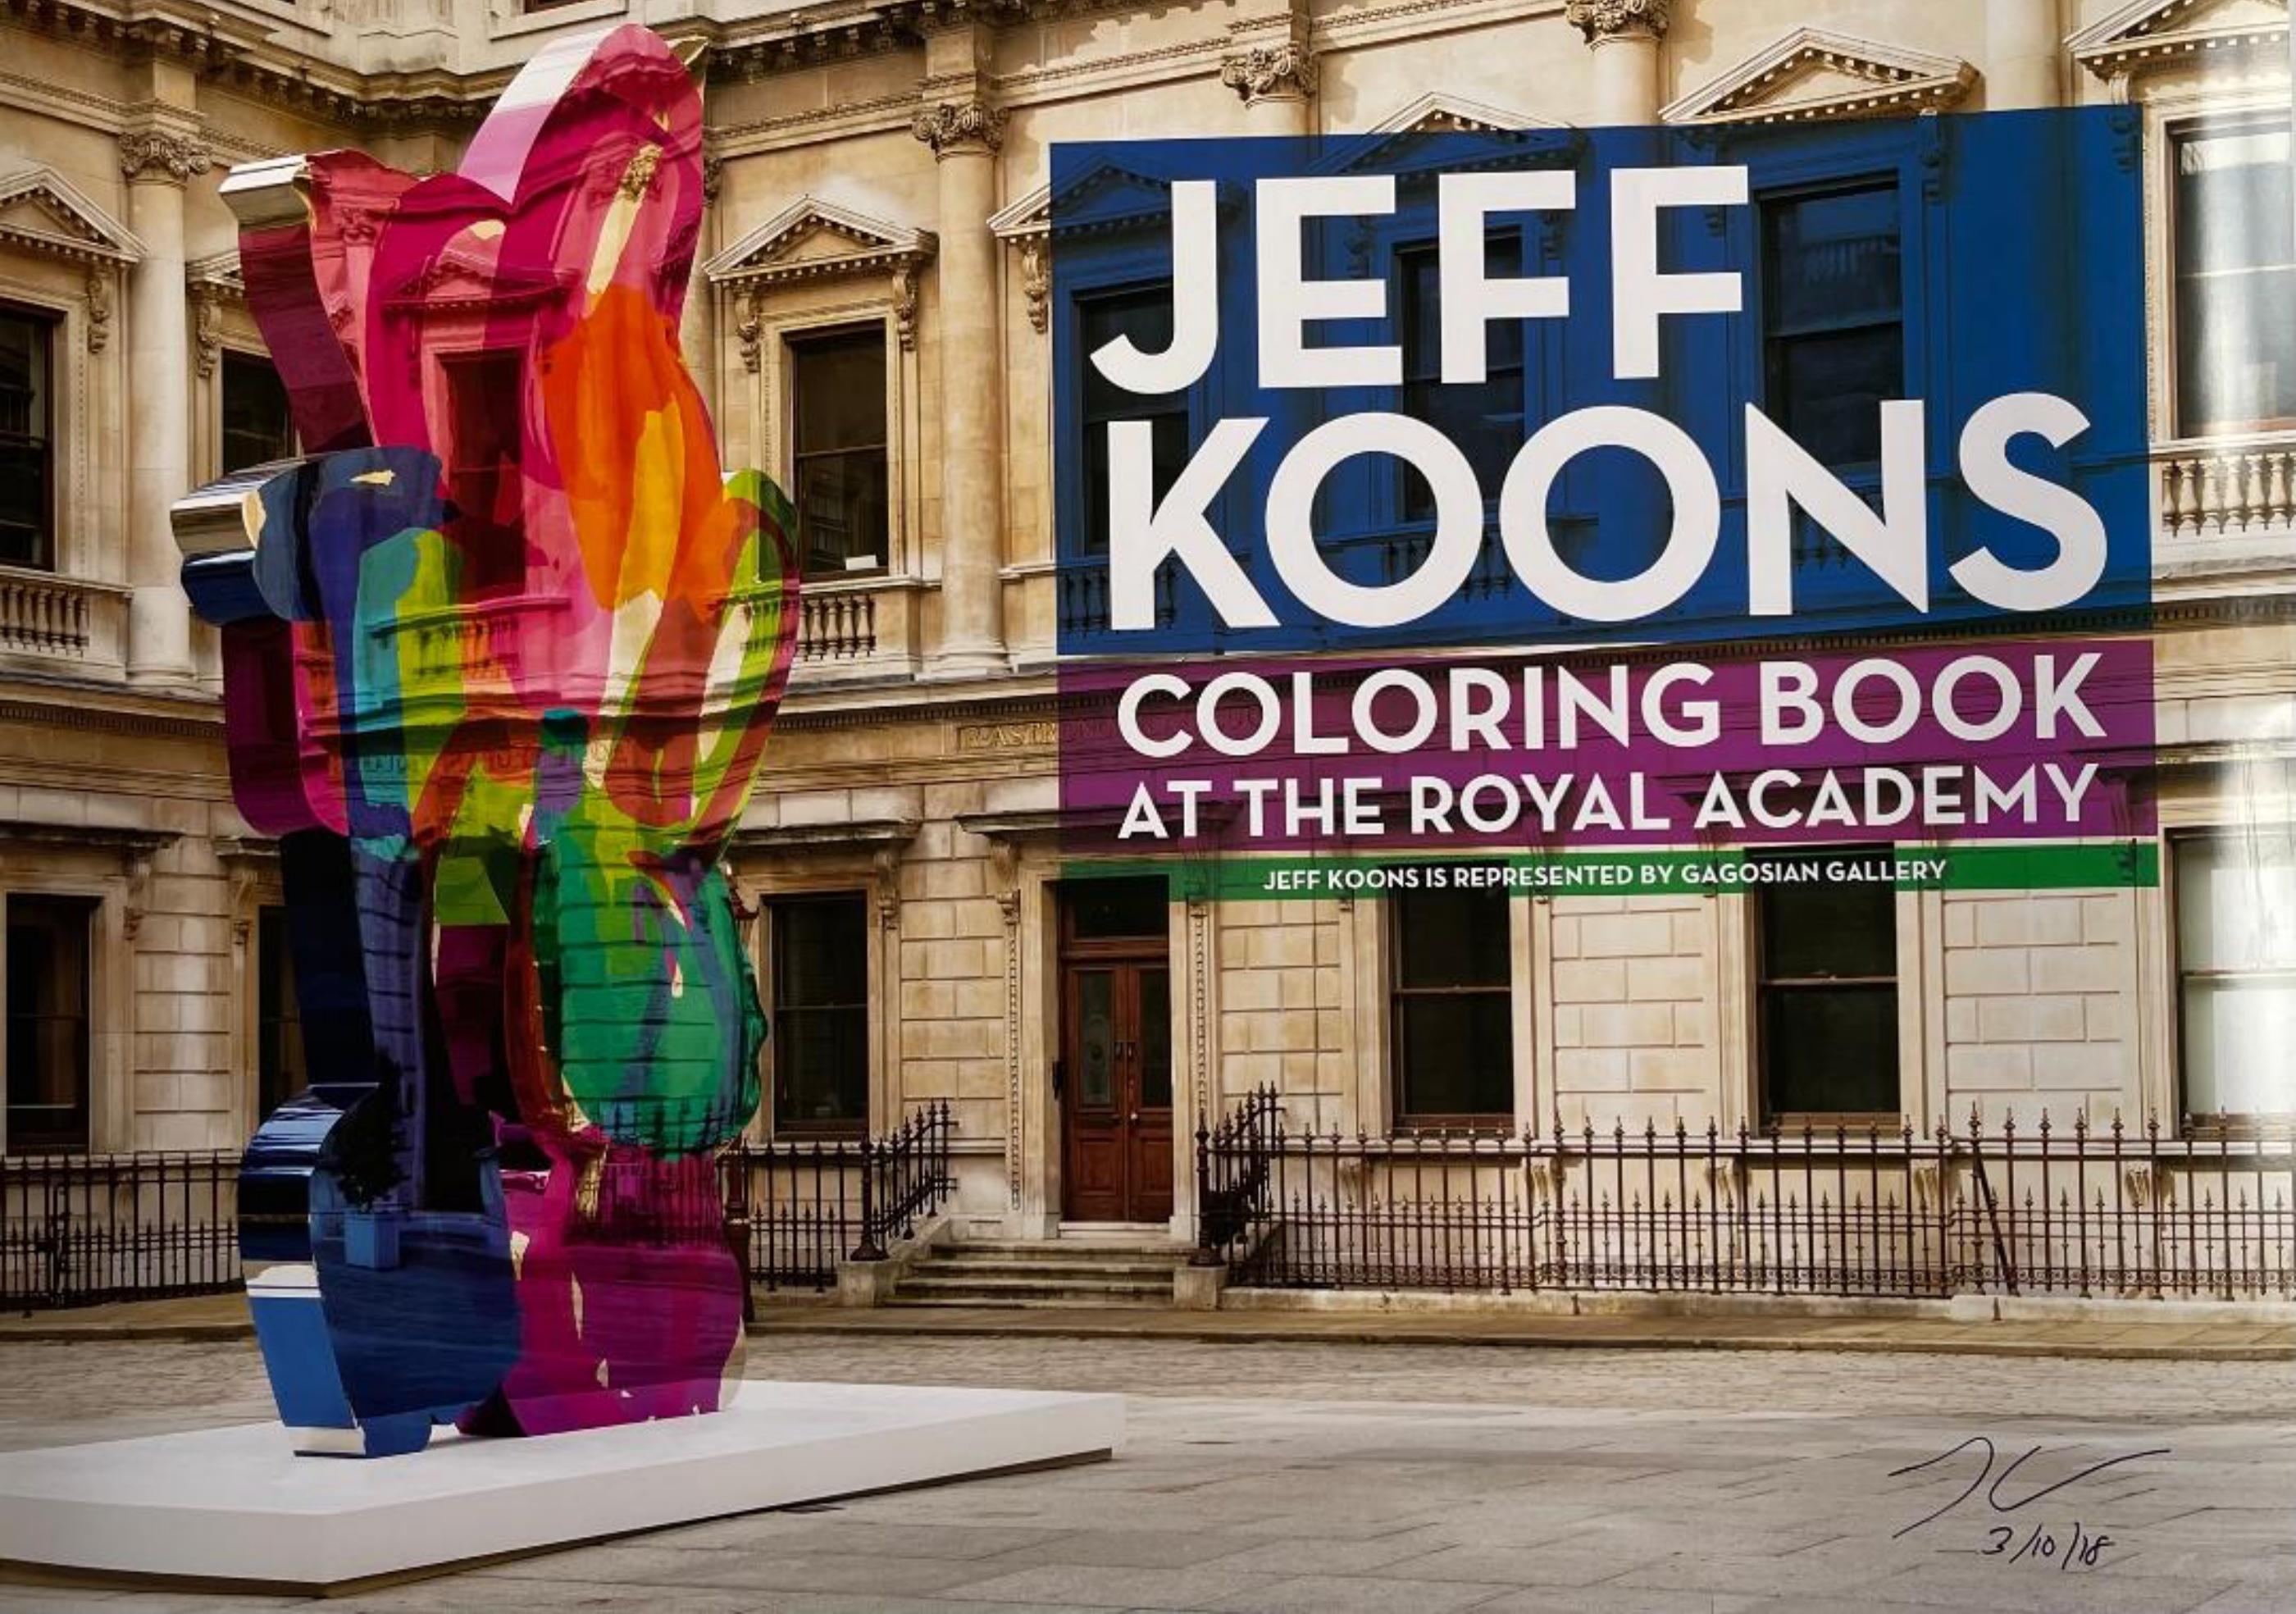 JEFF KOONS
Poster of Jeff Koons Coloring Book at the Royal Academy of Arts, 2011 (Hand Signed), 2018
Offset lithograph
26 1/2 × 36 1/4 inches
Boldly hand signed and dated by Jeff Koons in black marker on lower right front 3/10/2018 at Gagosian